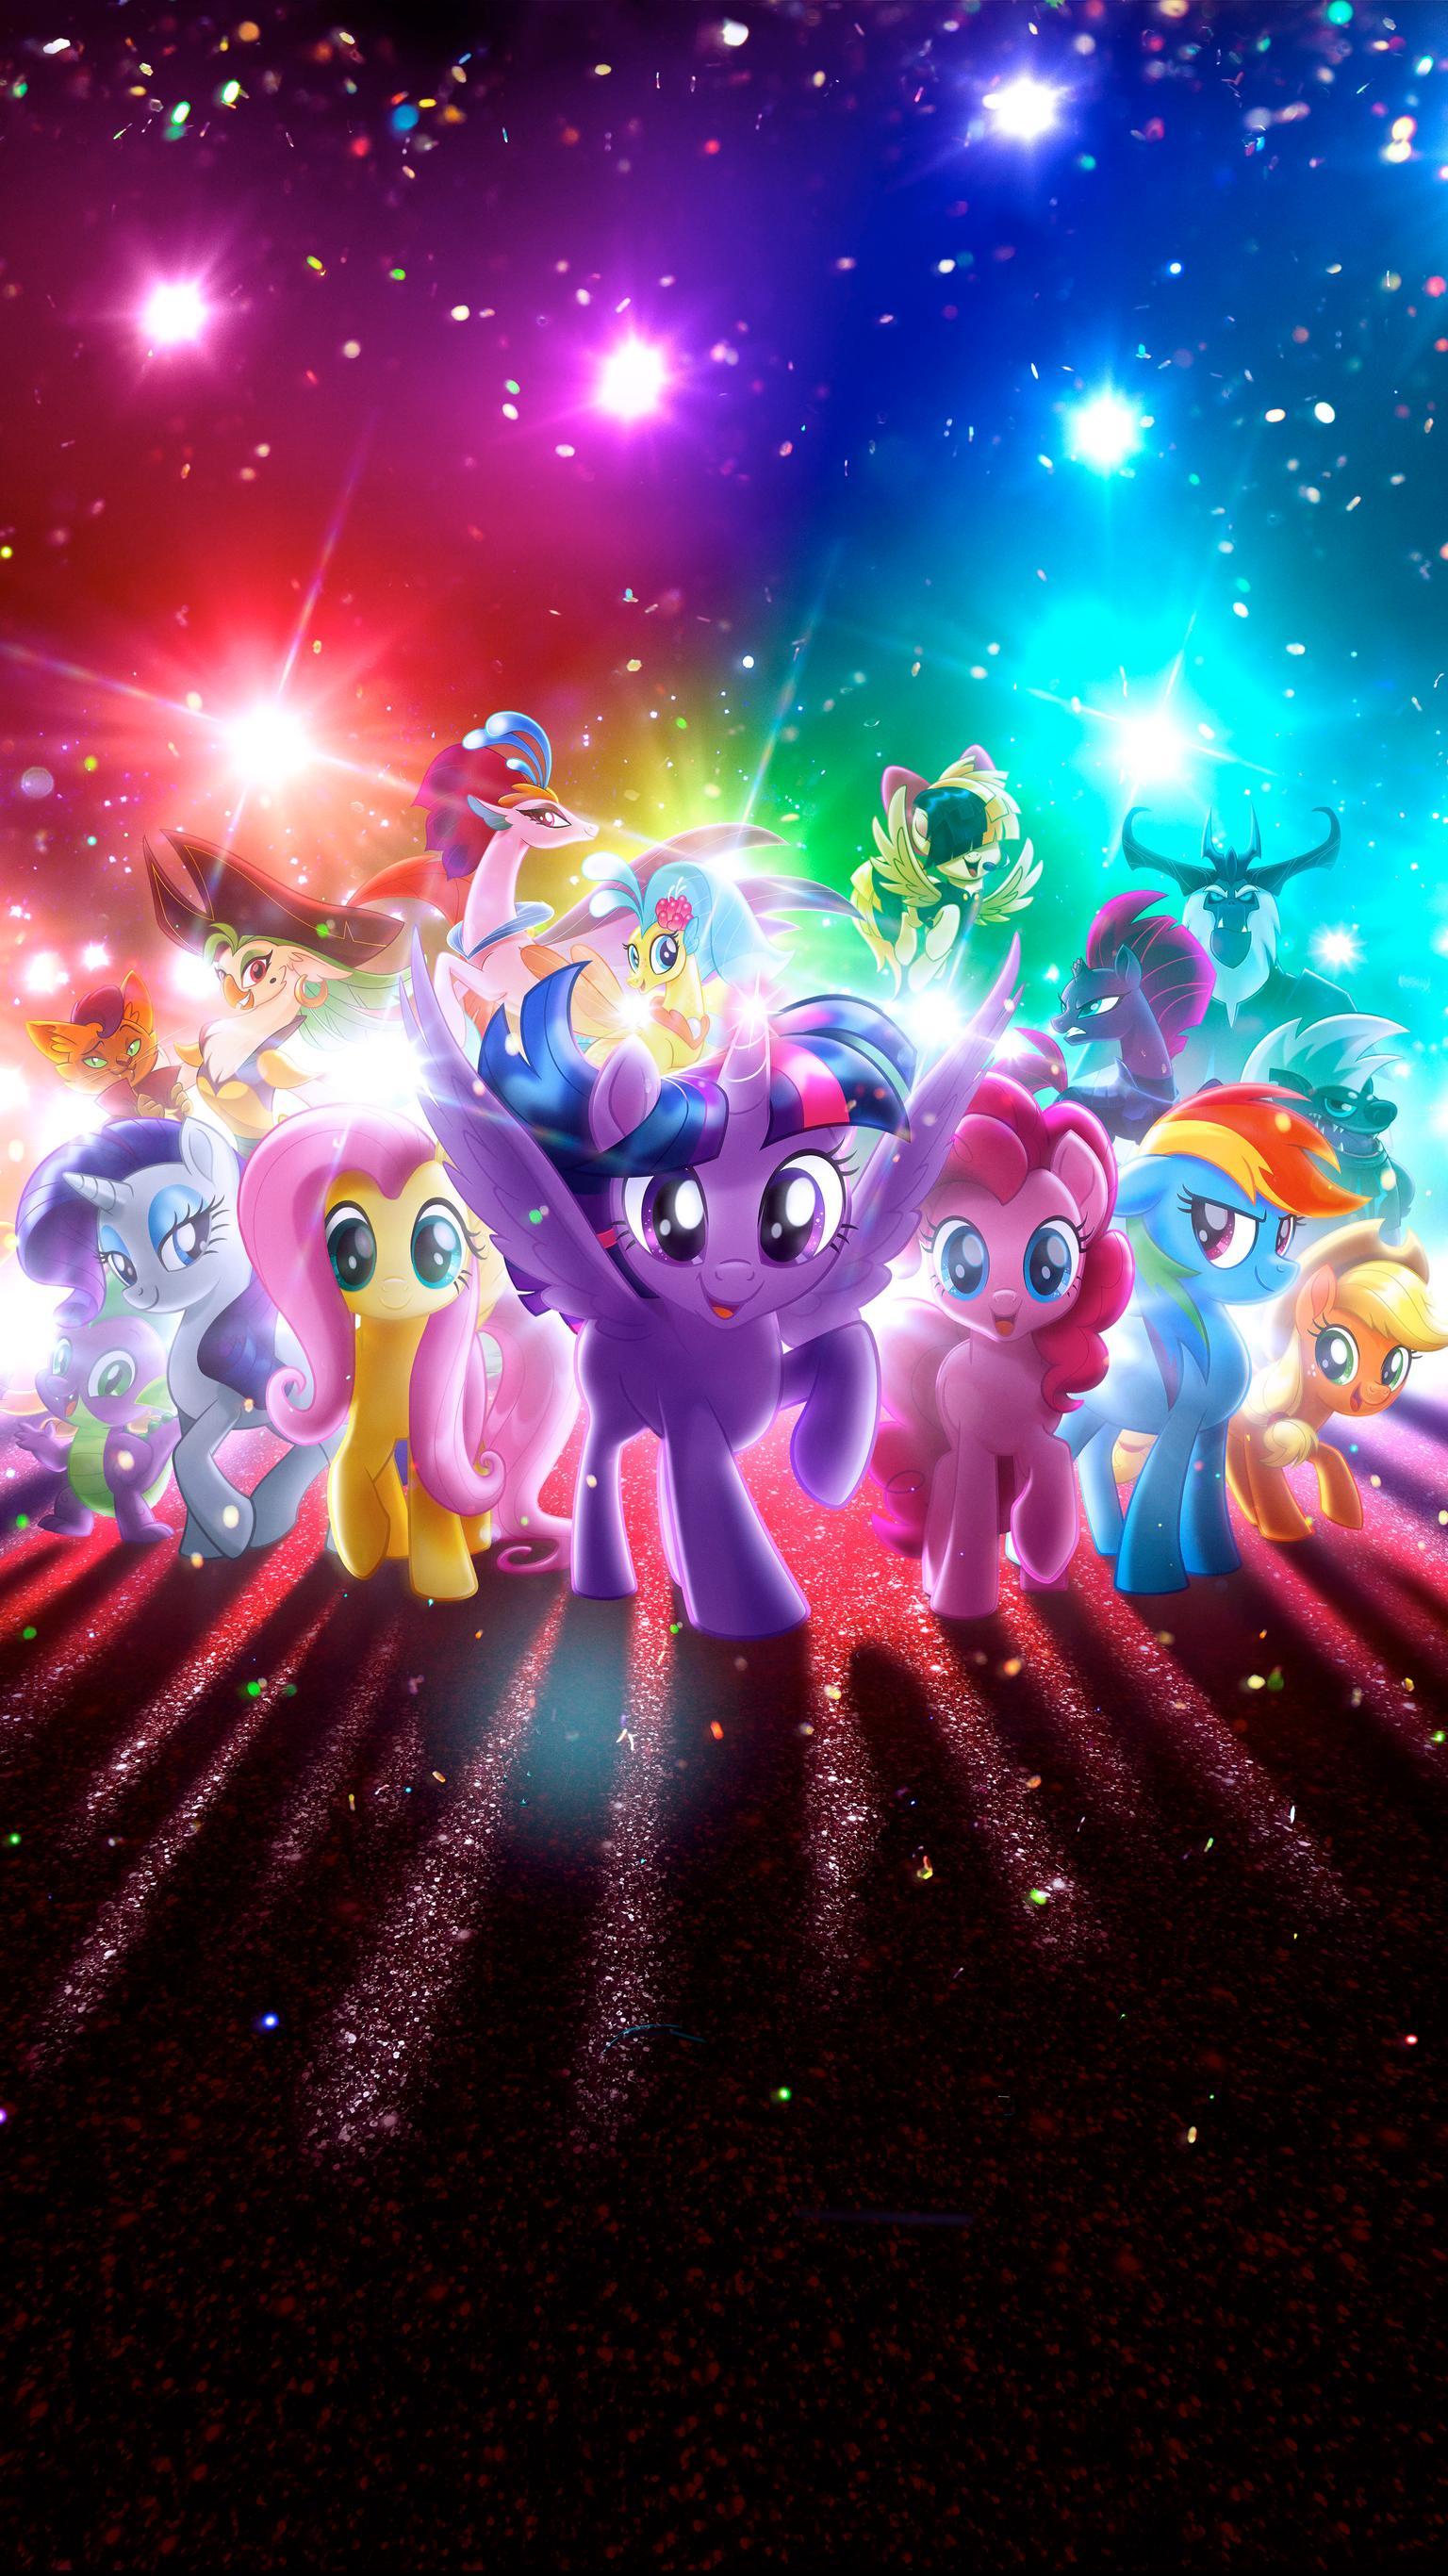 20 Discord My Little Pony HD Wallpapers and Backgrounds